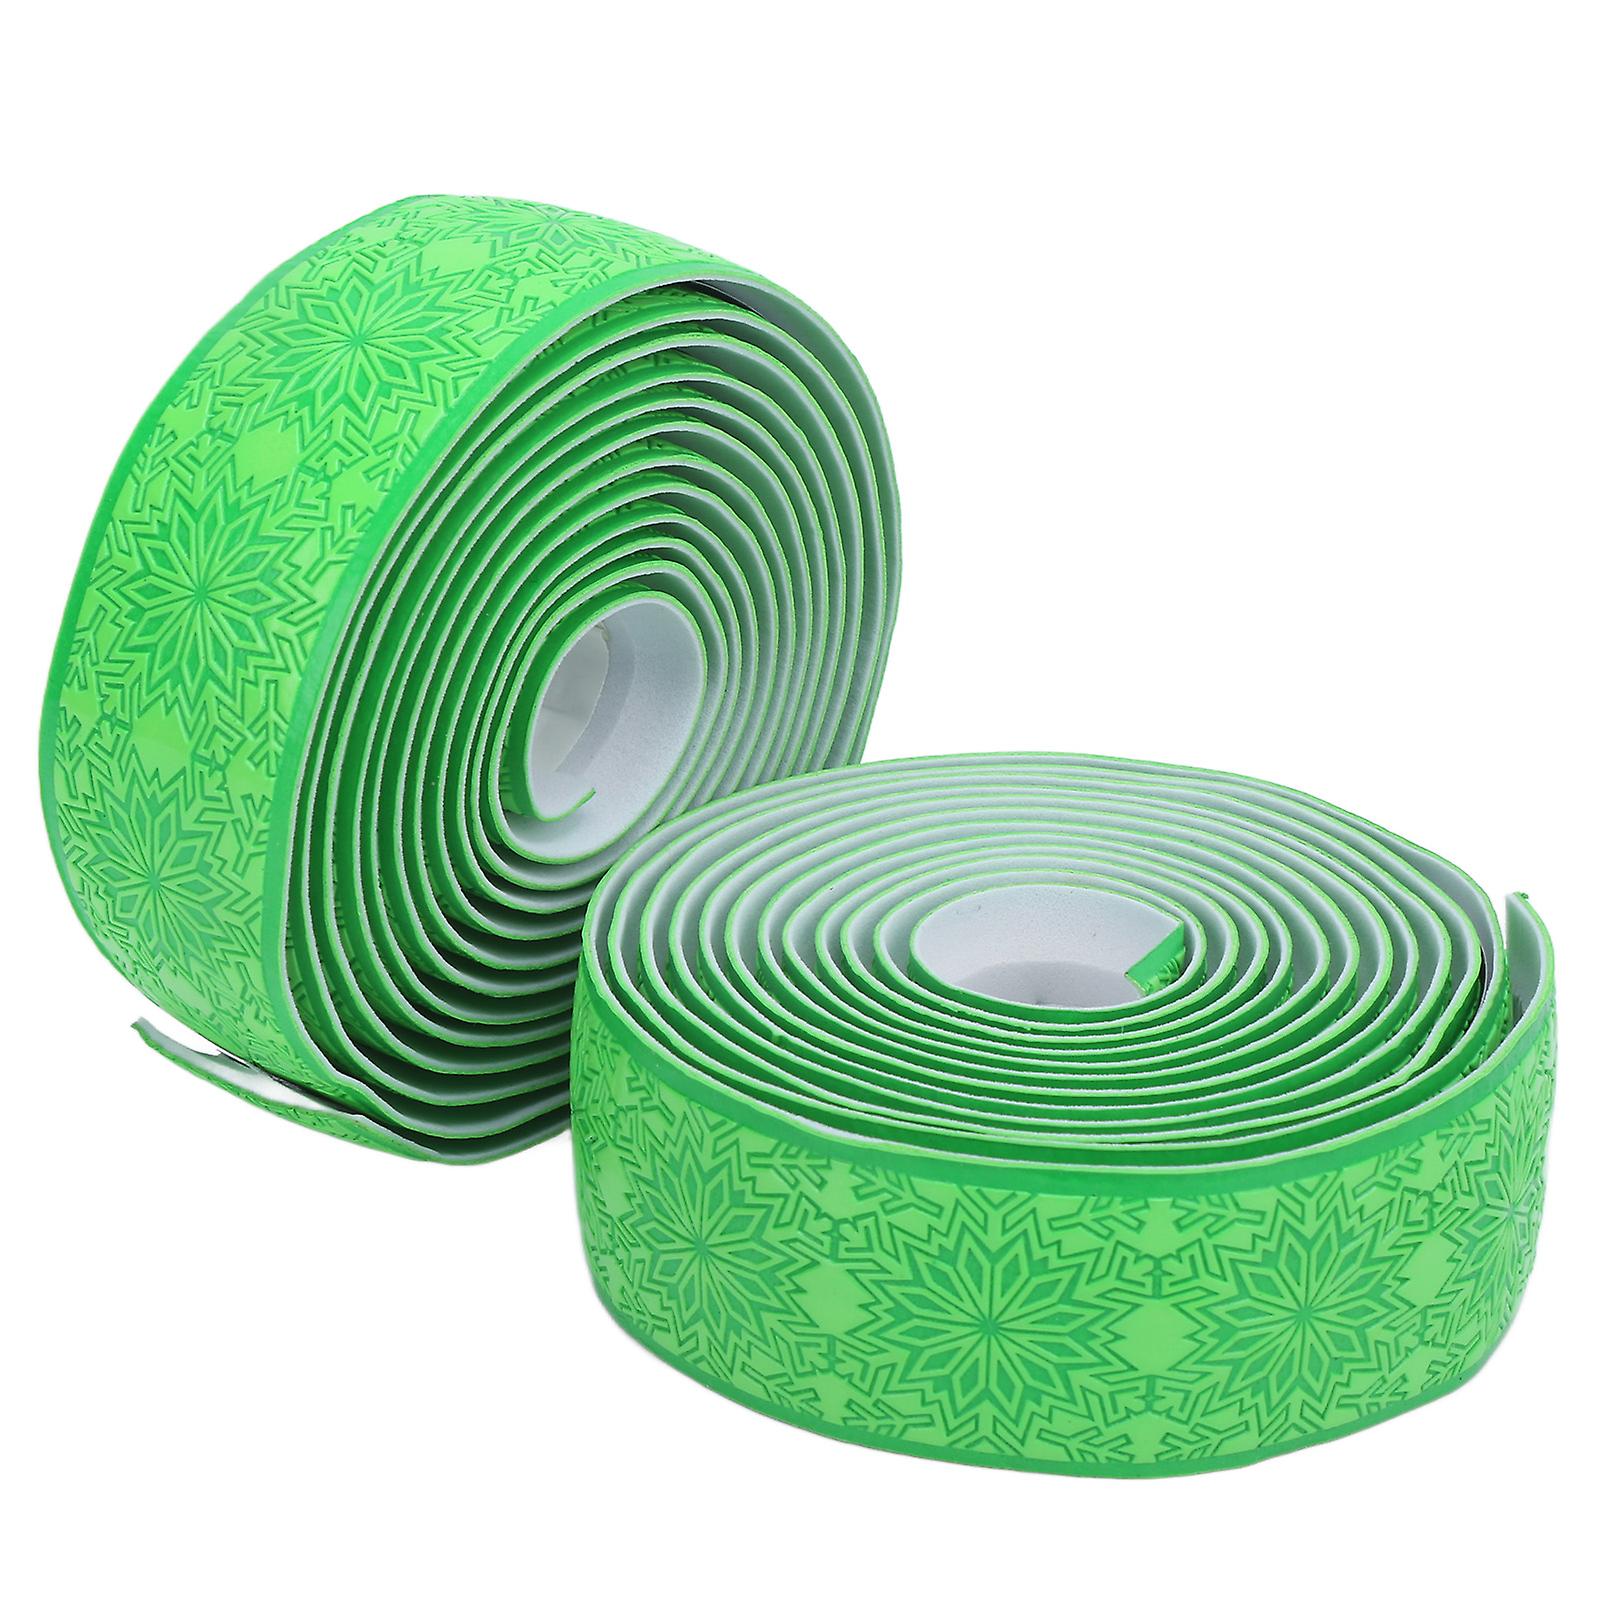 Bolany Road Handlebar Tape Absorb Sweat Easy To Clean Waterproof Bicycle Handlebar Tapessnowflake Green